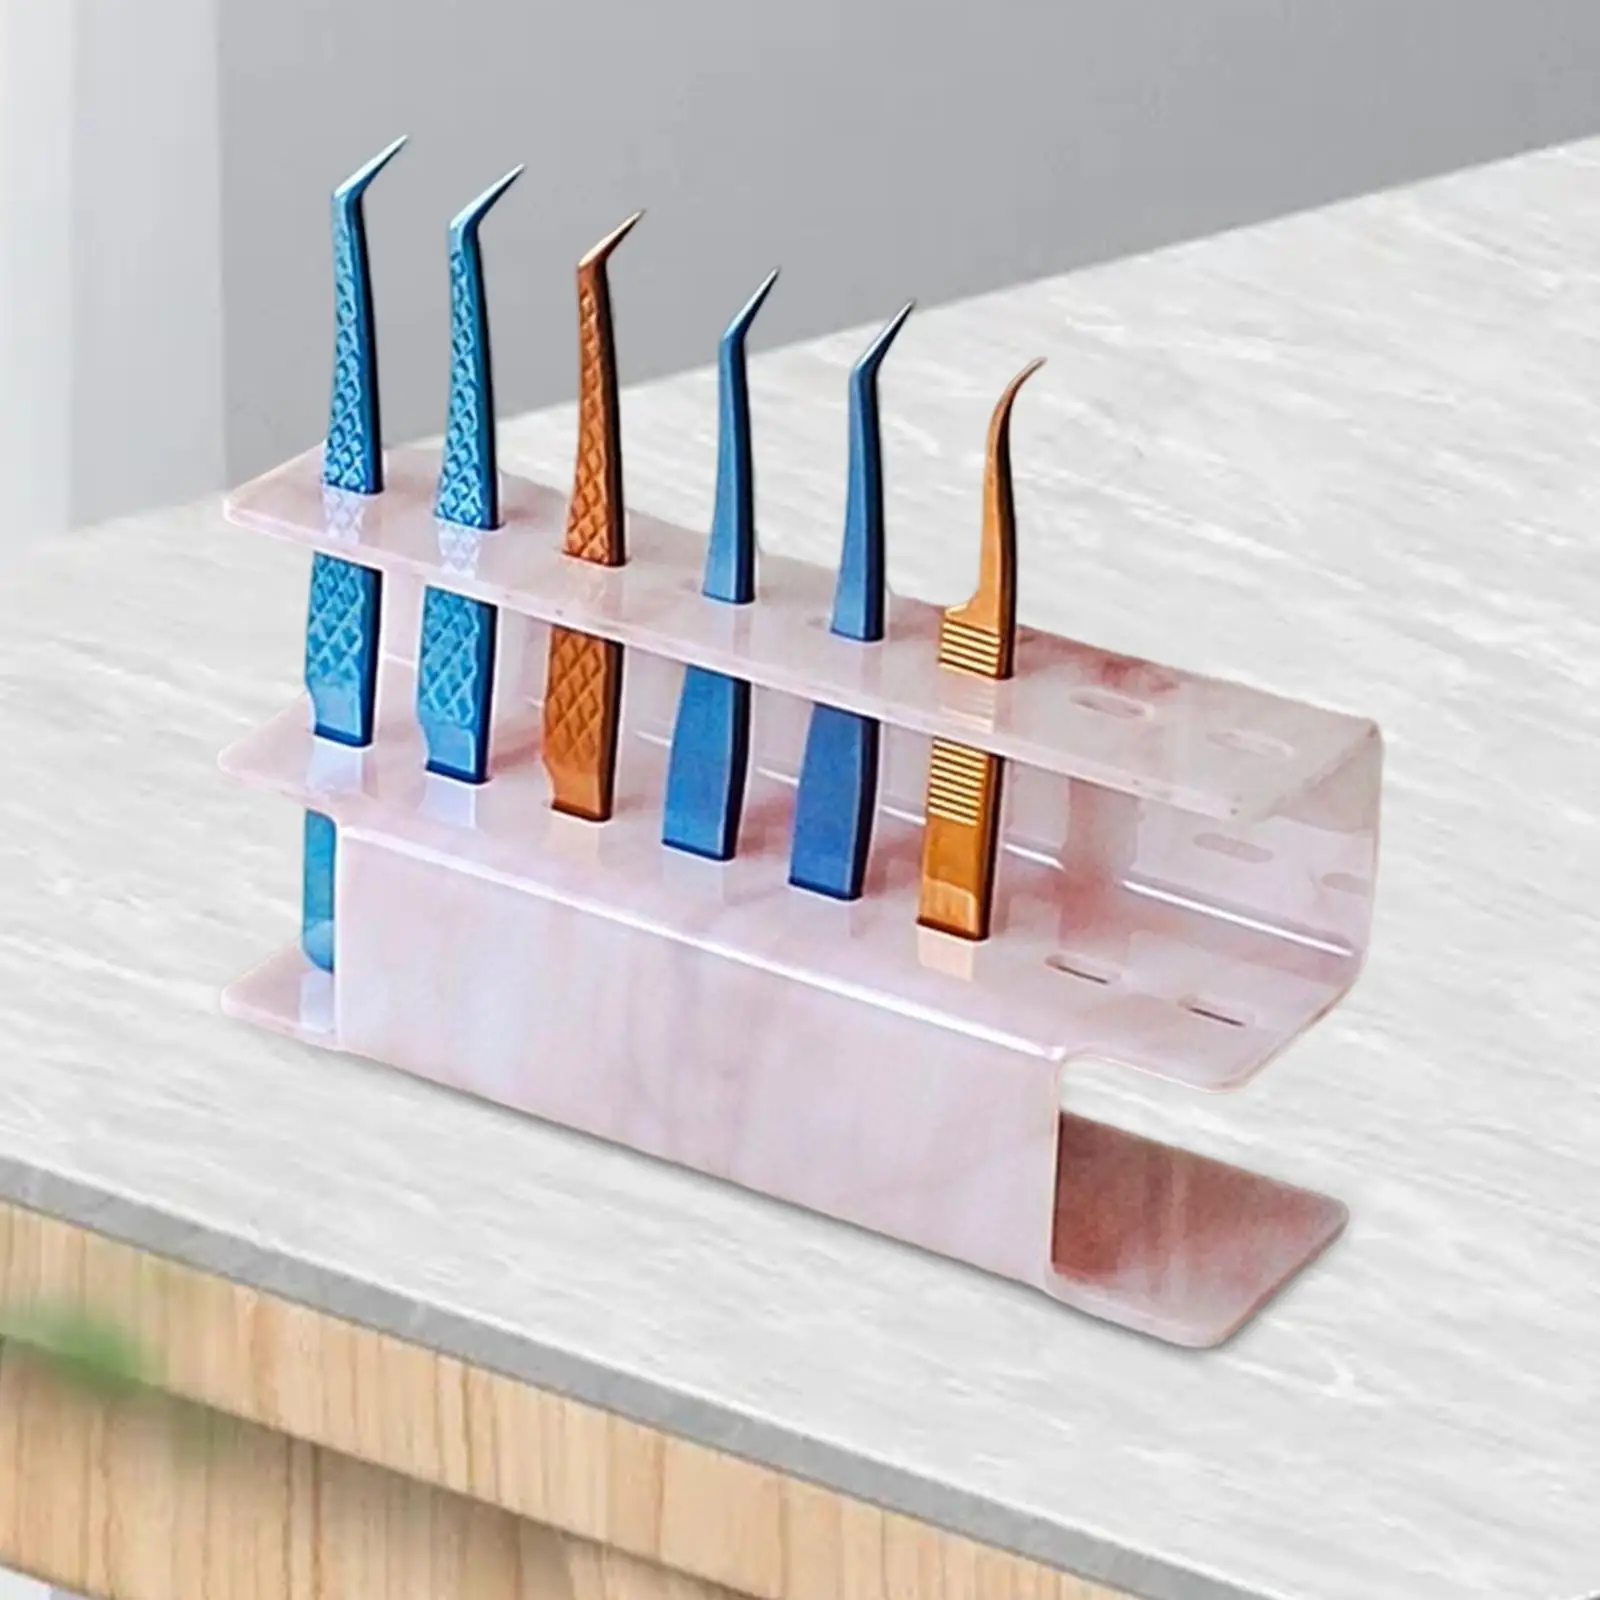 8 Holes Display Stand Make up Supplies Stand Shelf Display Stand Holder Organizer for Home